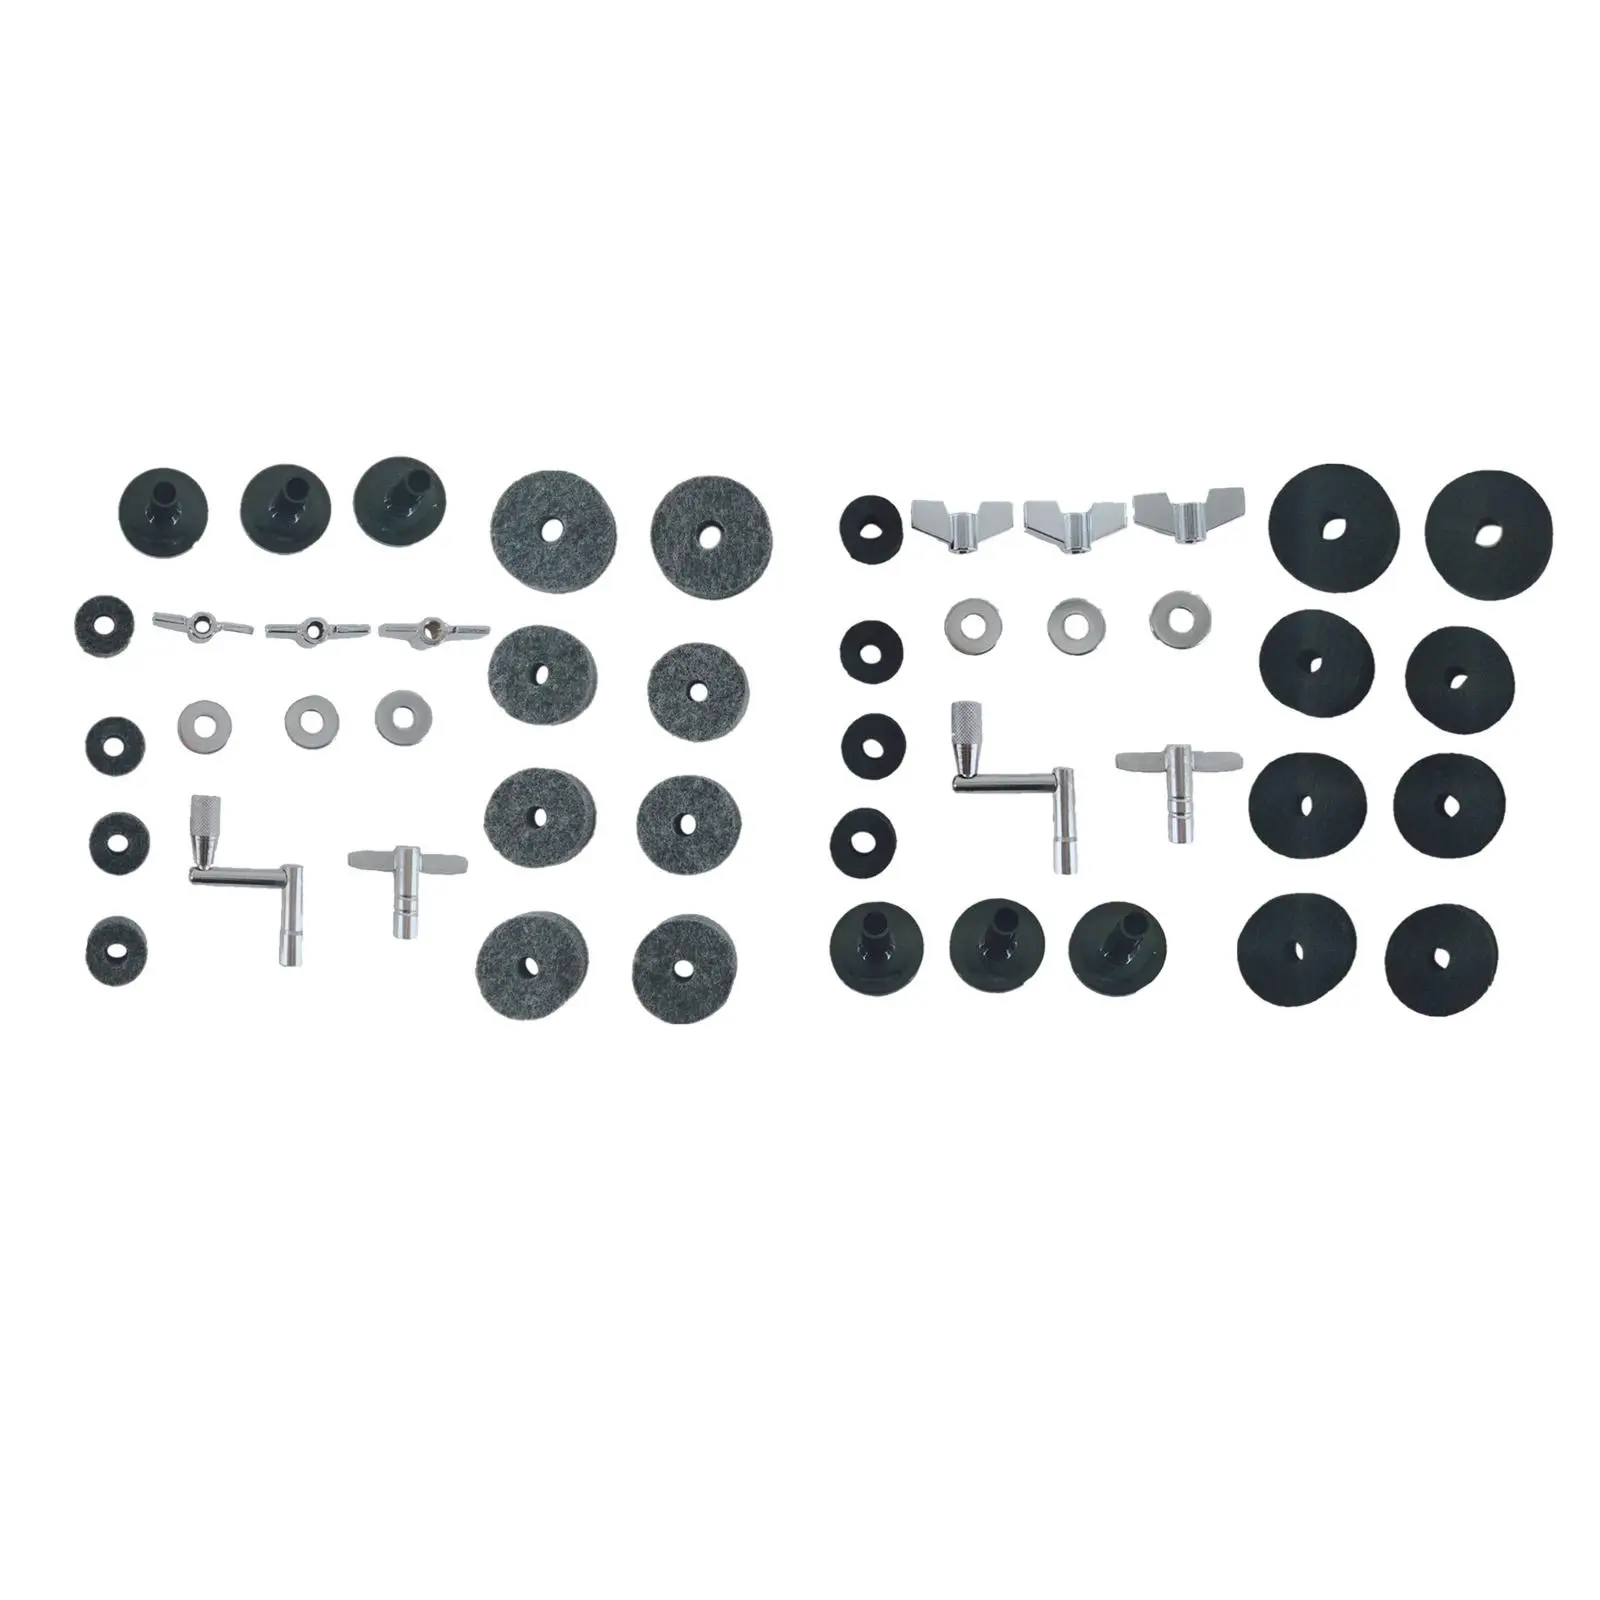 23x Replacement Parts Cymbal Felts Washers Replacement Accessories Replacement Kit Wing Nuts Musical Accessories Drum Felt